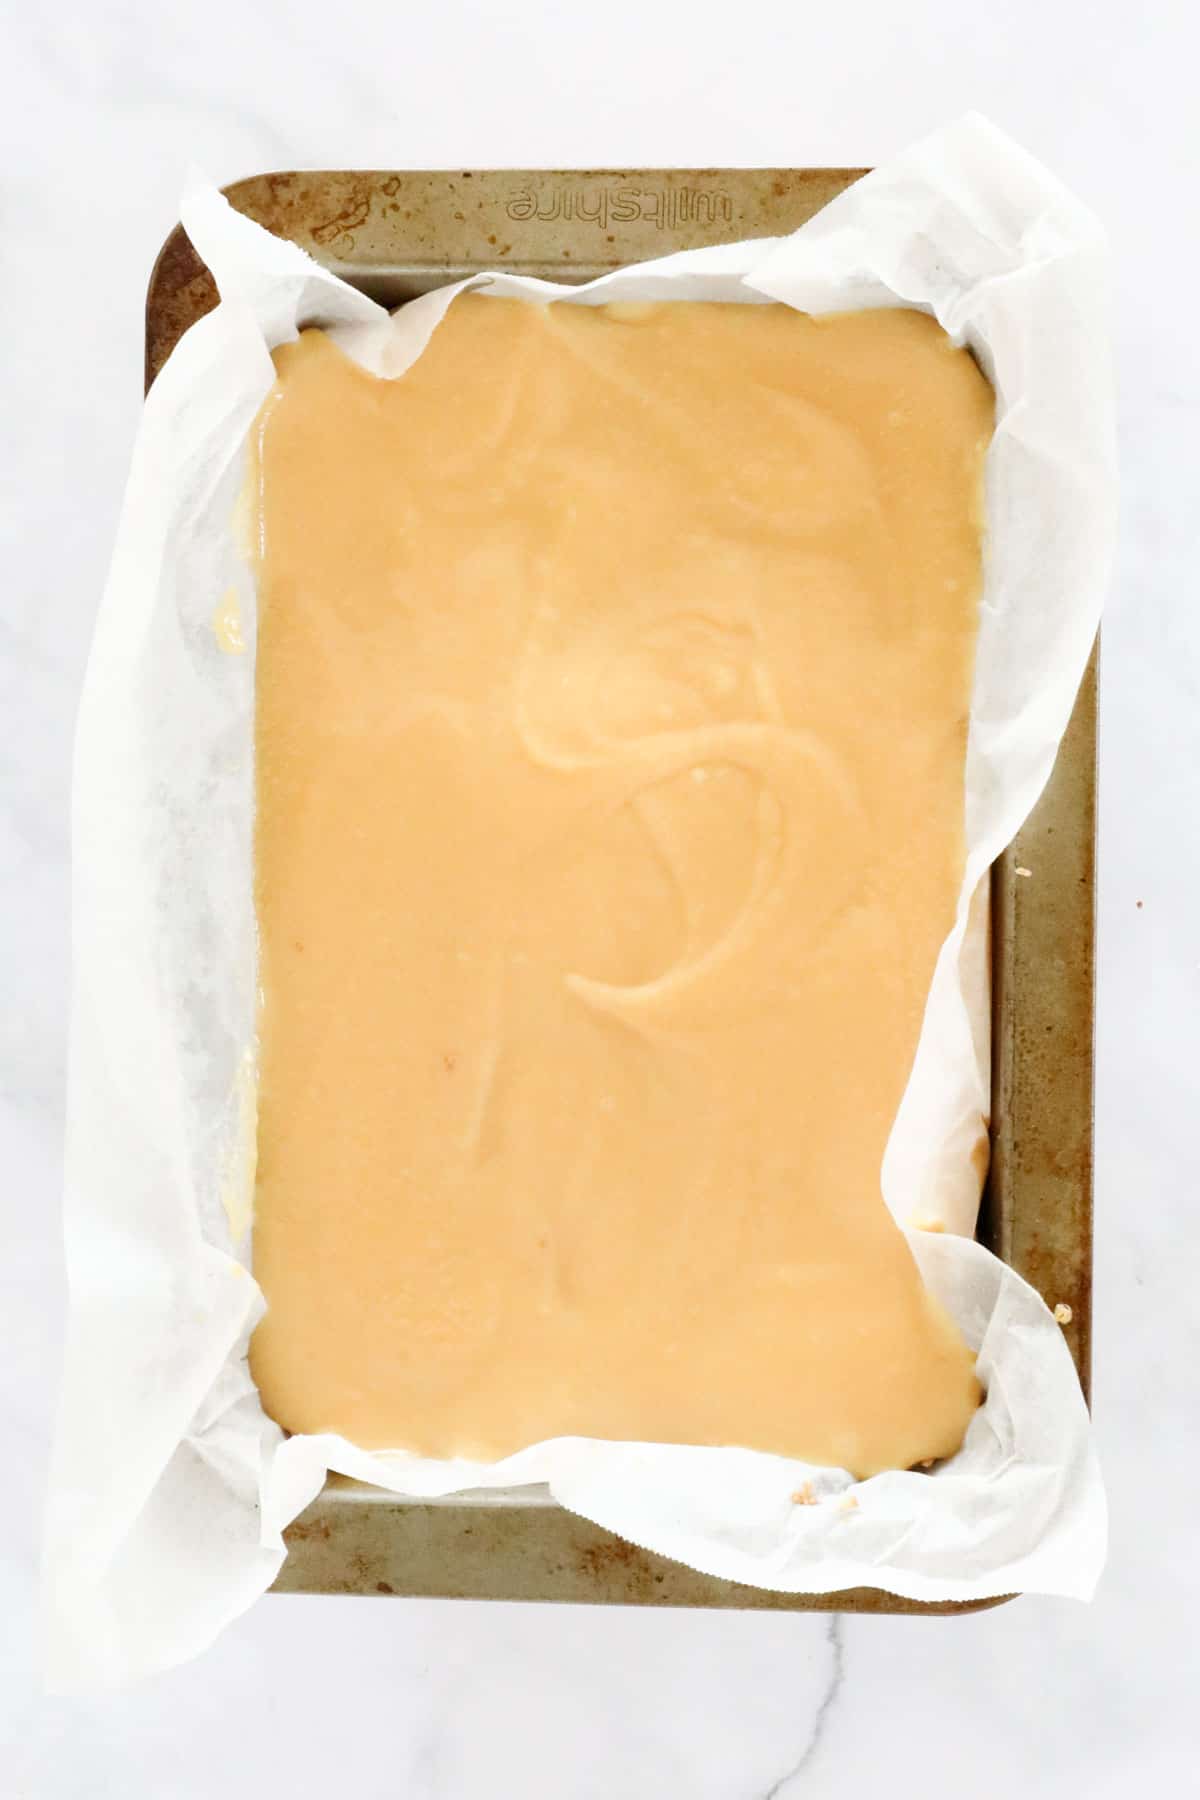 Thick caramel mix poured over baked base in a baking tray.